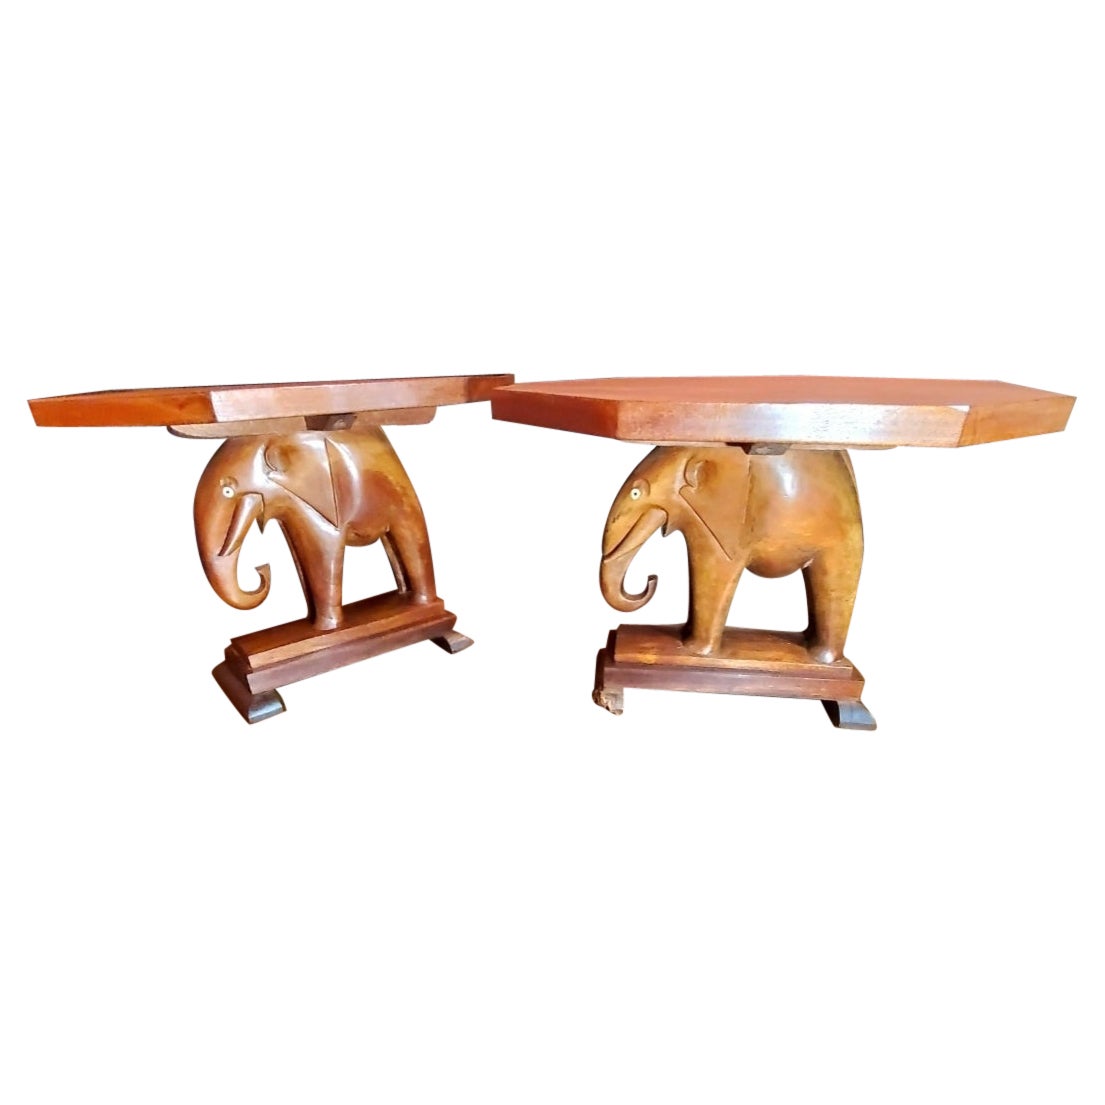 1940s Nigerian Carved Mahogany End Tables With Elephant Bases - a Pair.